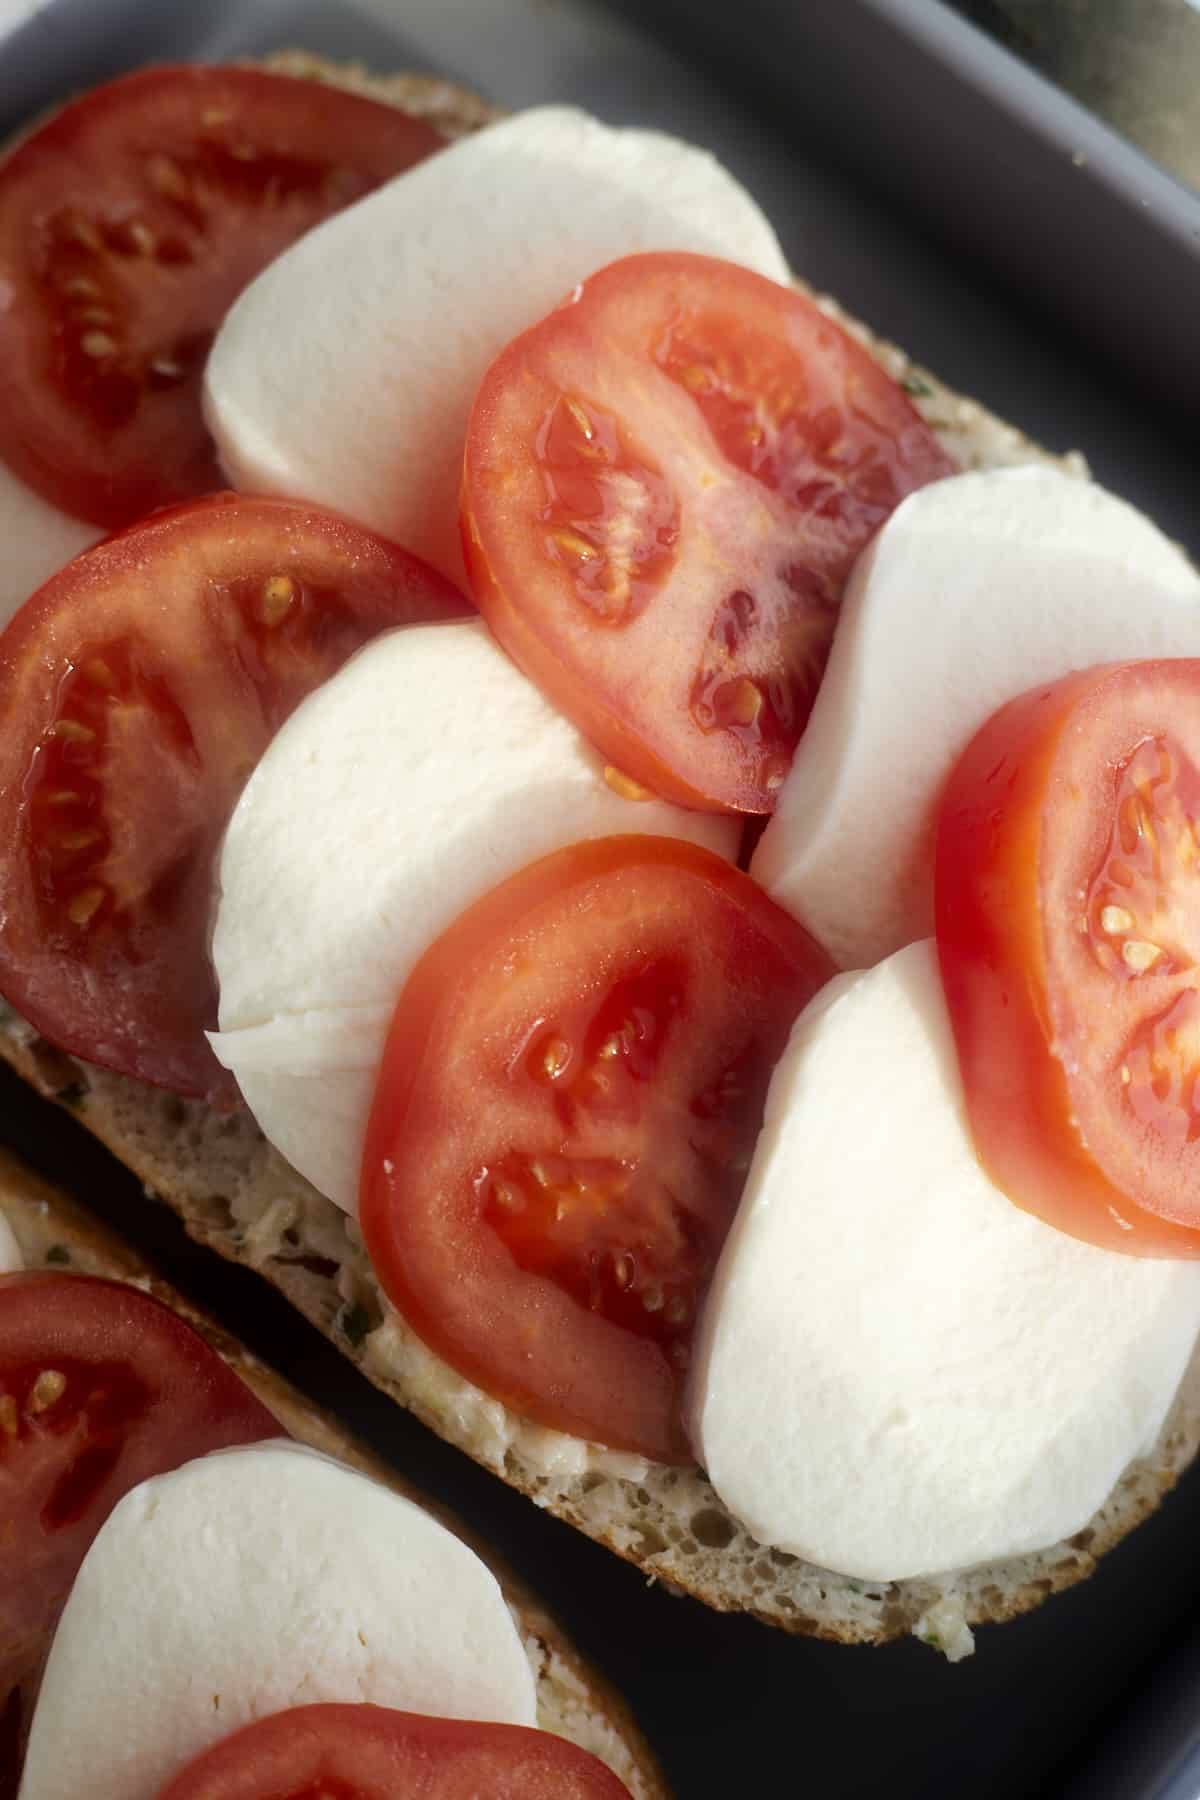 unbaked bread topped with garlic butter, tomato, and mozzarella 